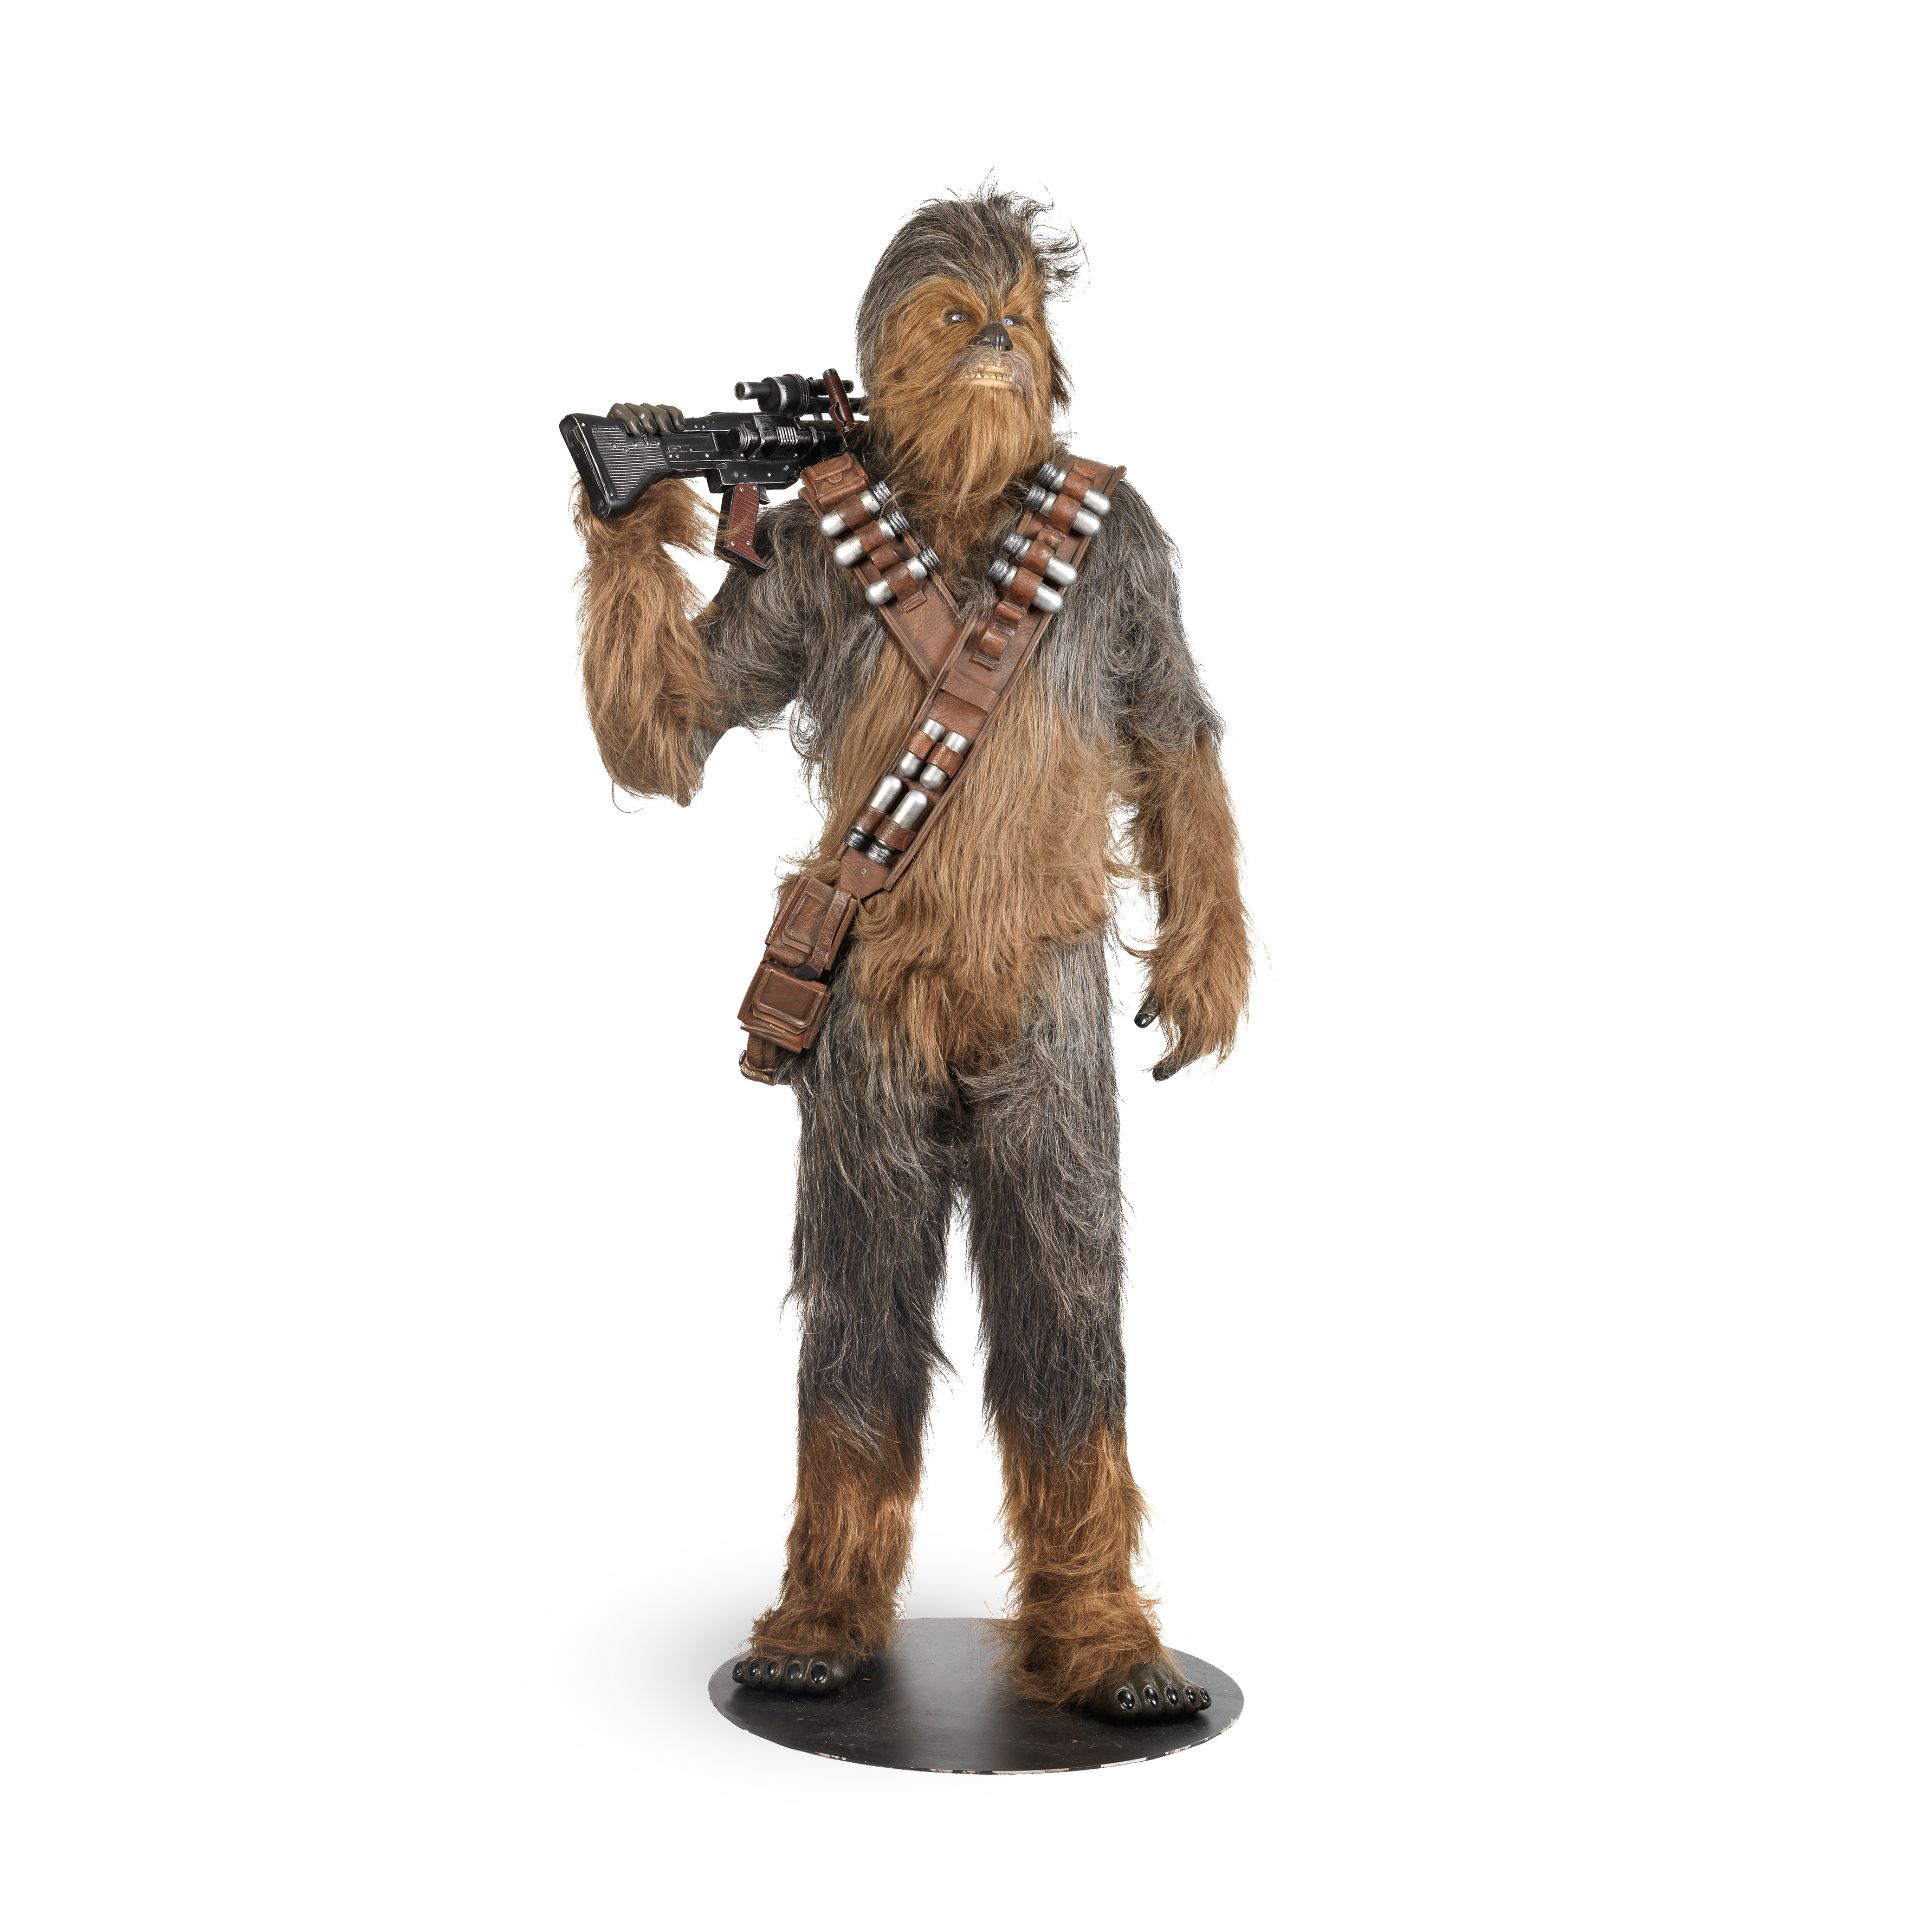 Star Wars: A life-sized promotional statue of Chewbacca, Disney / Lucasfilm, 2020,